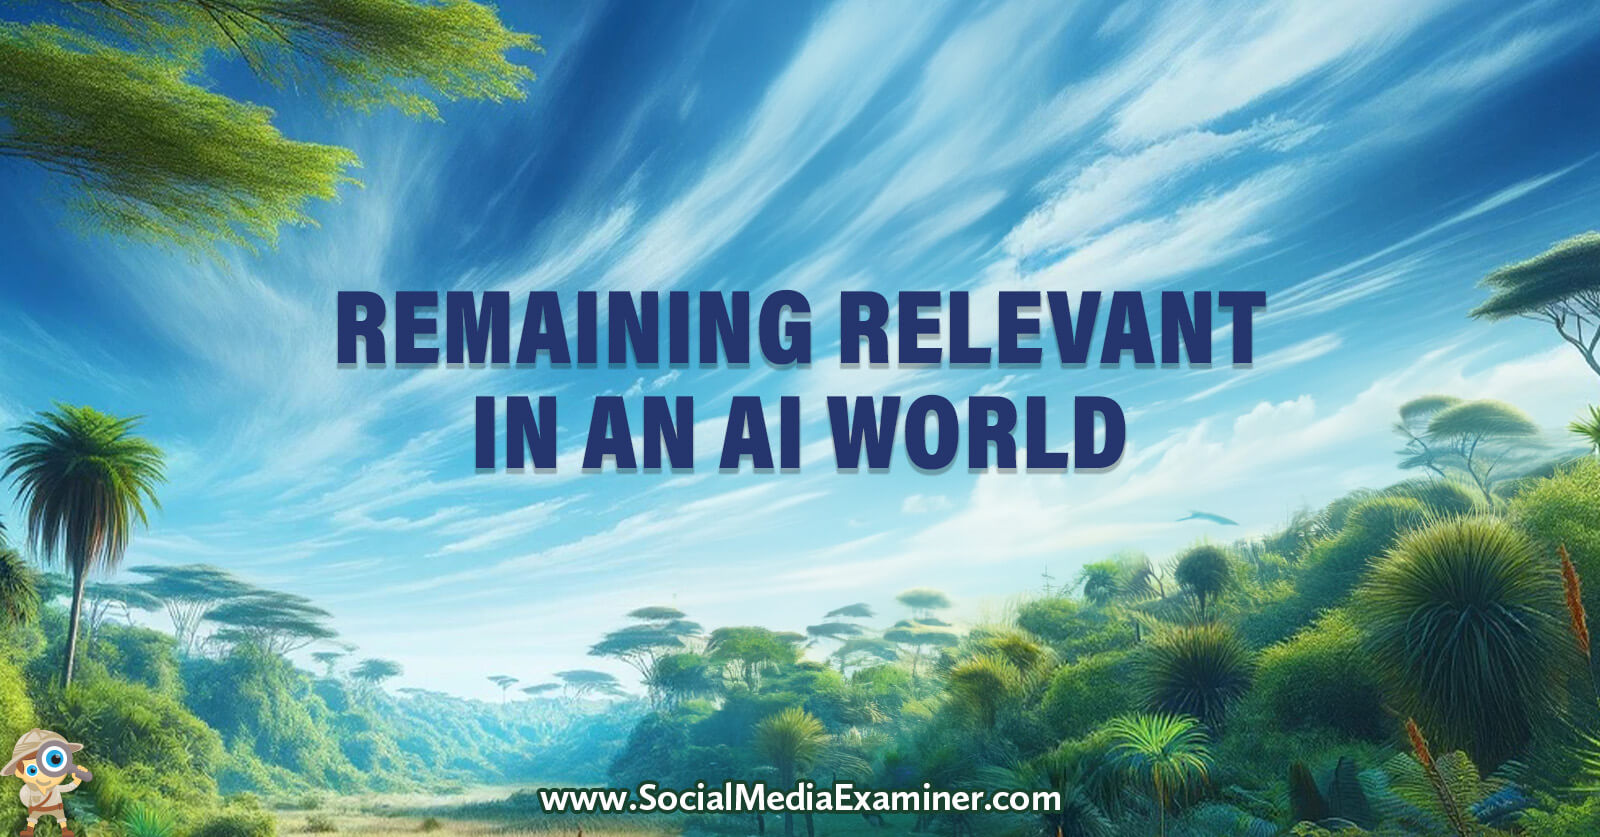 Remaining Relevant in an AI World by Social Media Examiner